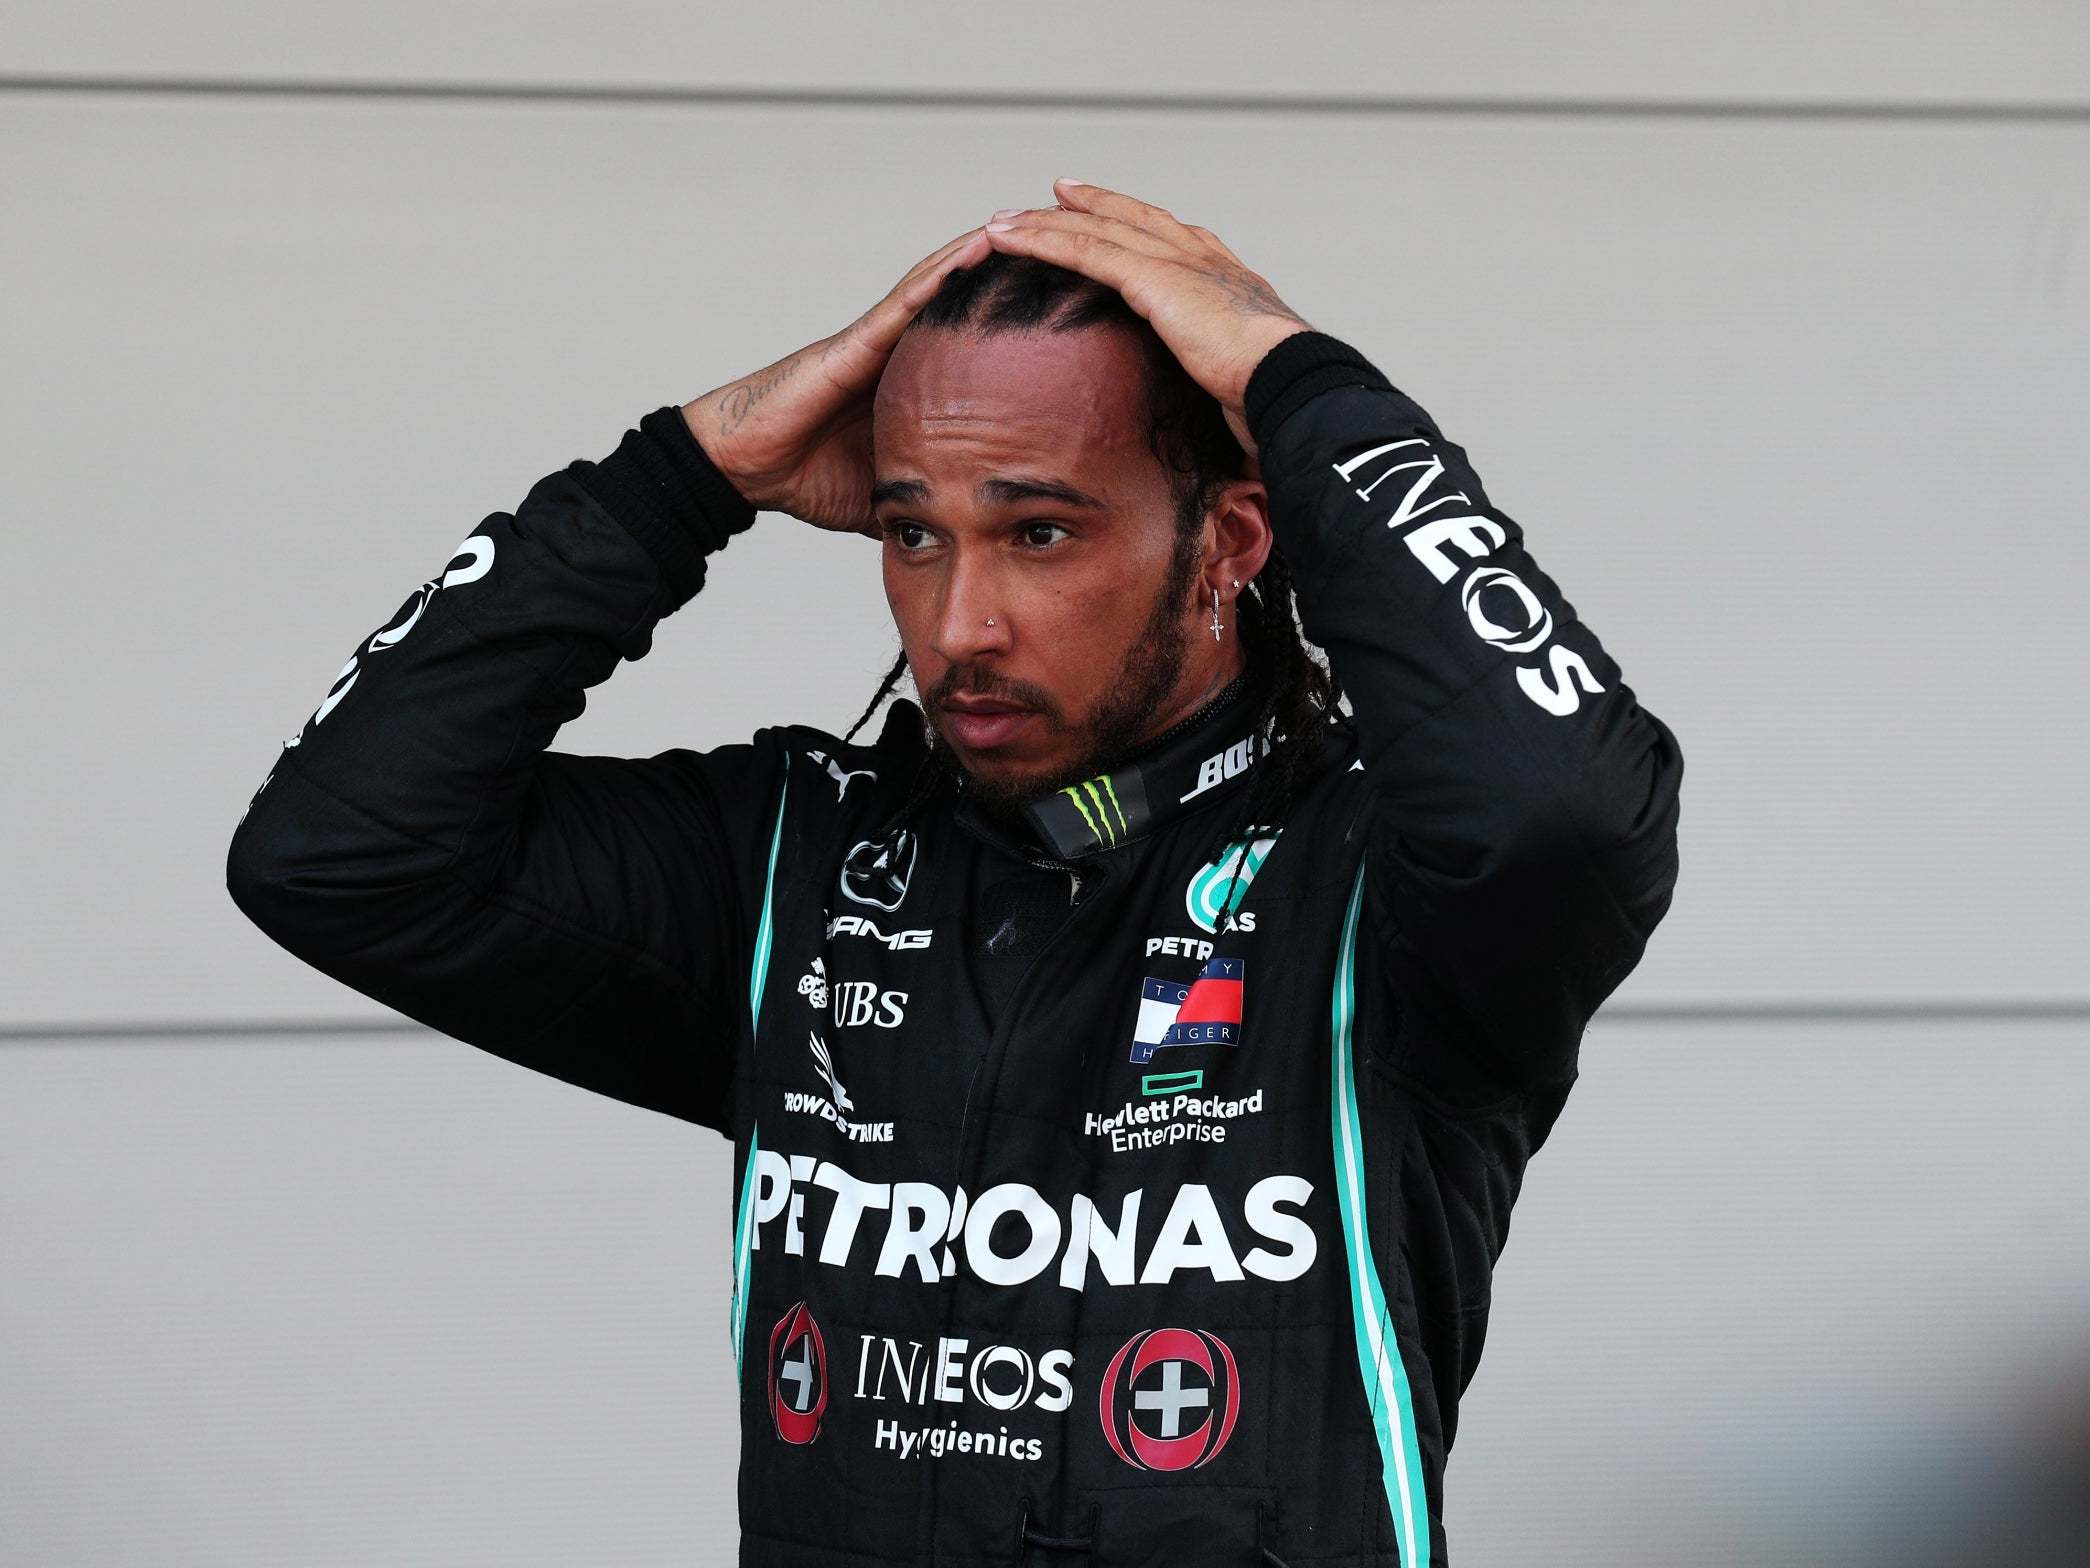 Spanish Grand Prix: 'Dazed' Lewis Hamilton was so 'zoned in' during victory he didn't realise he had won